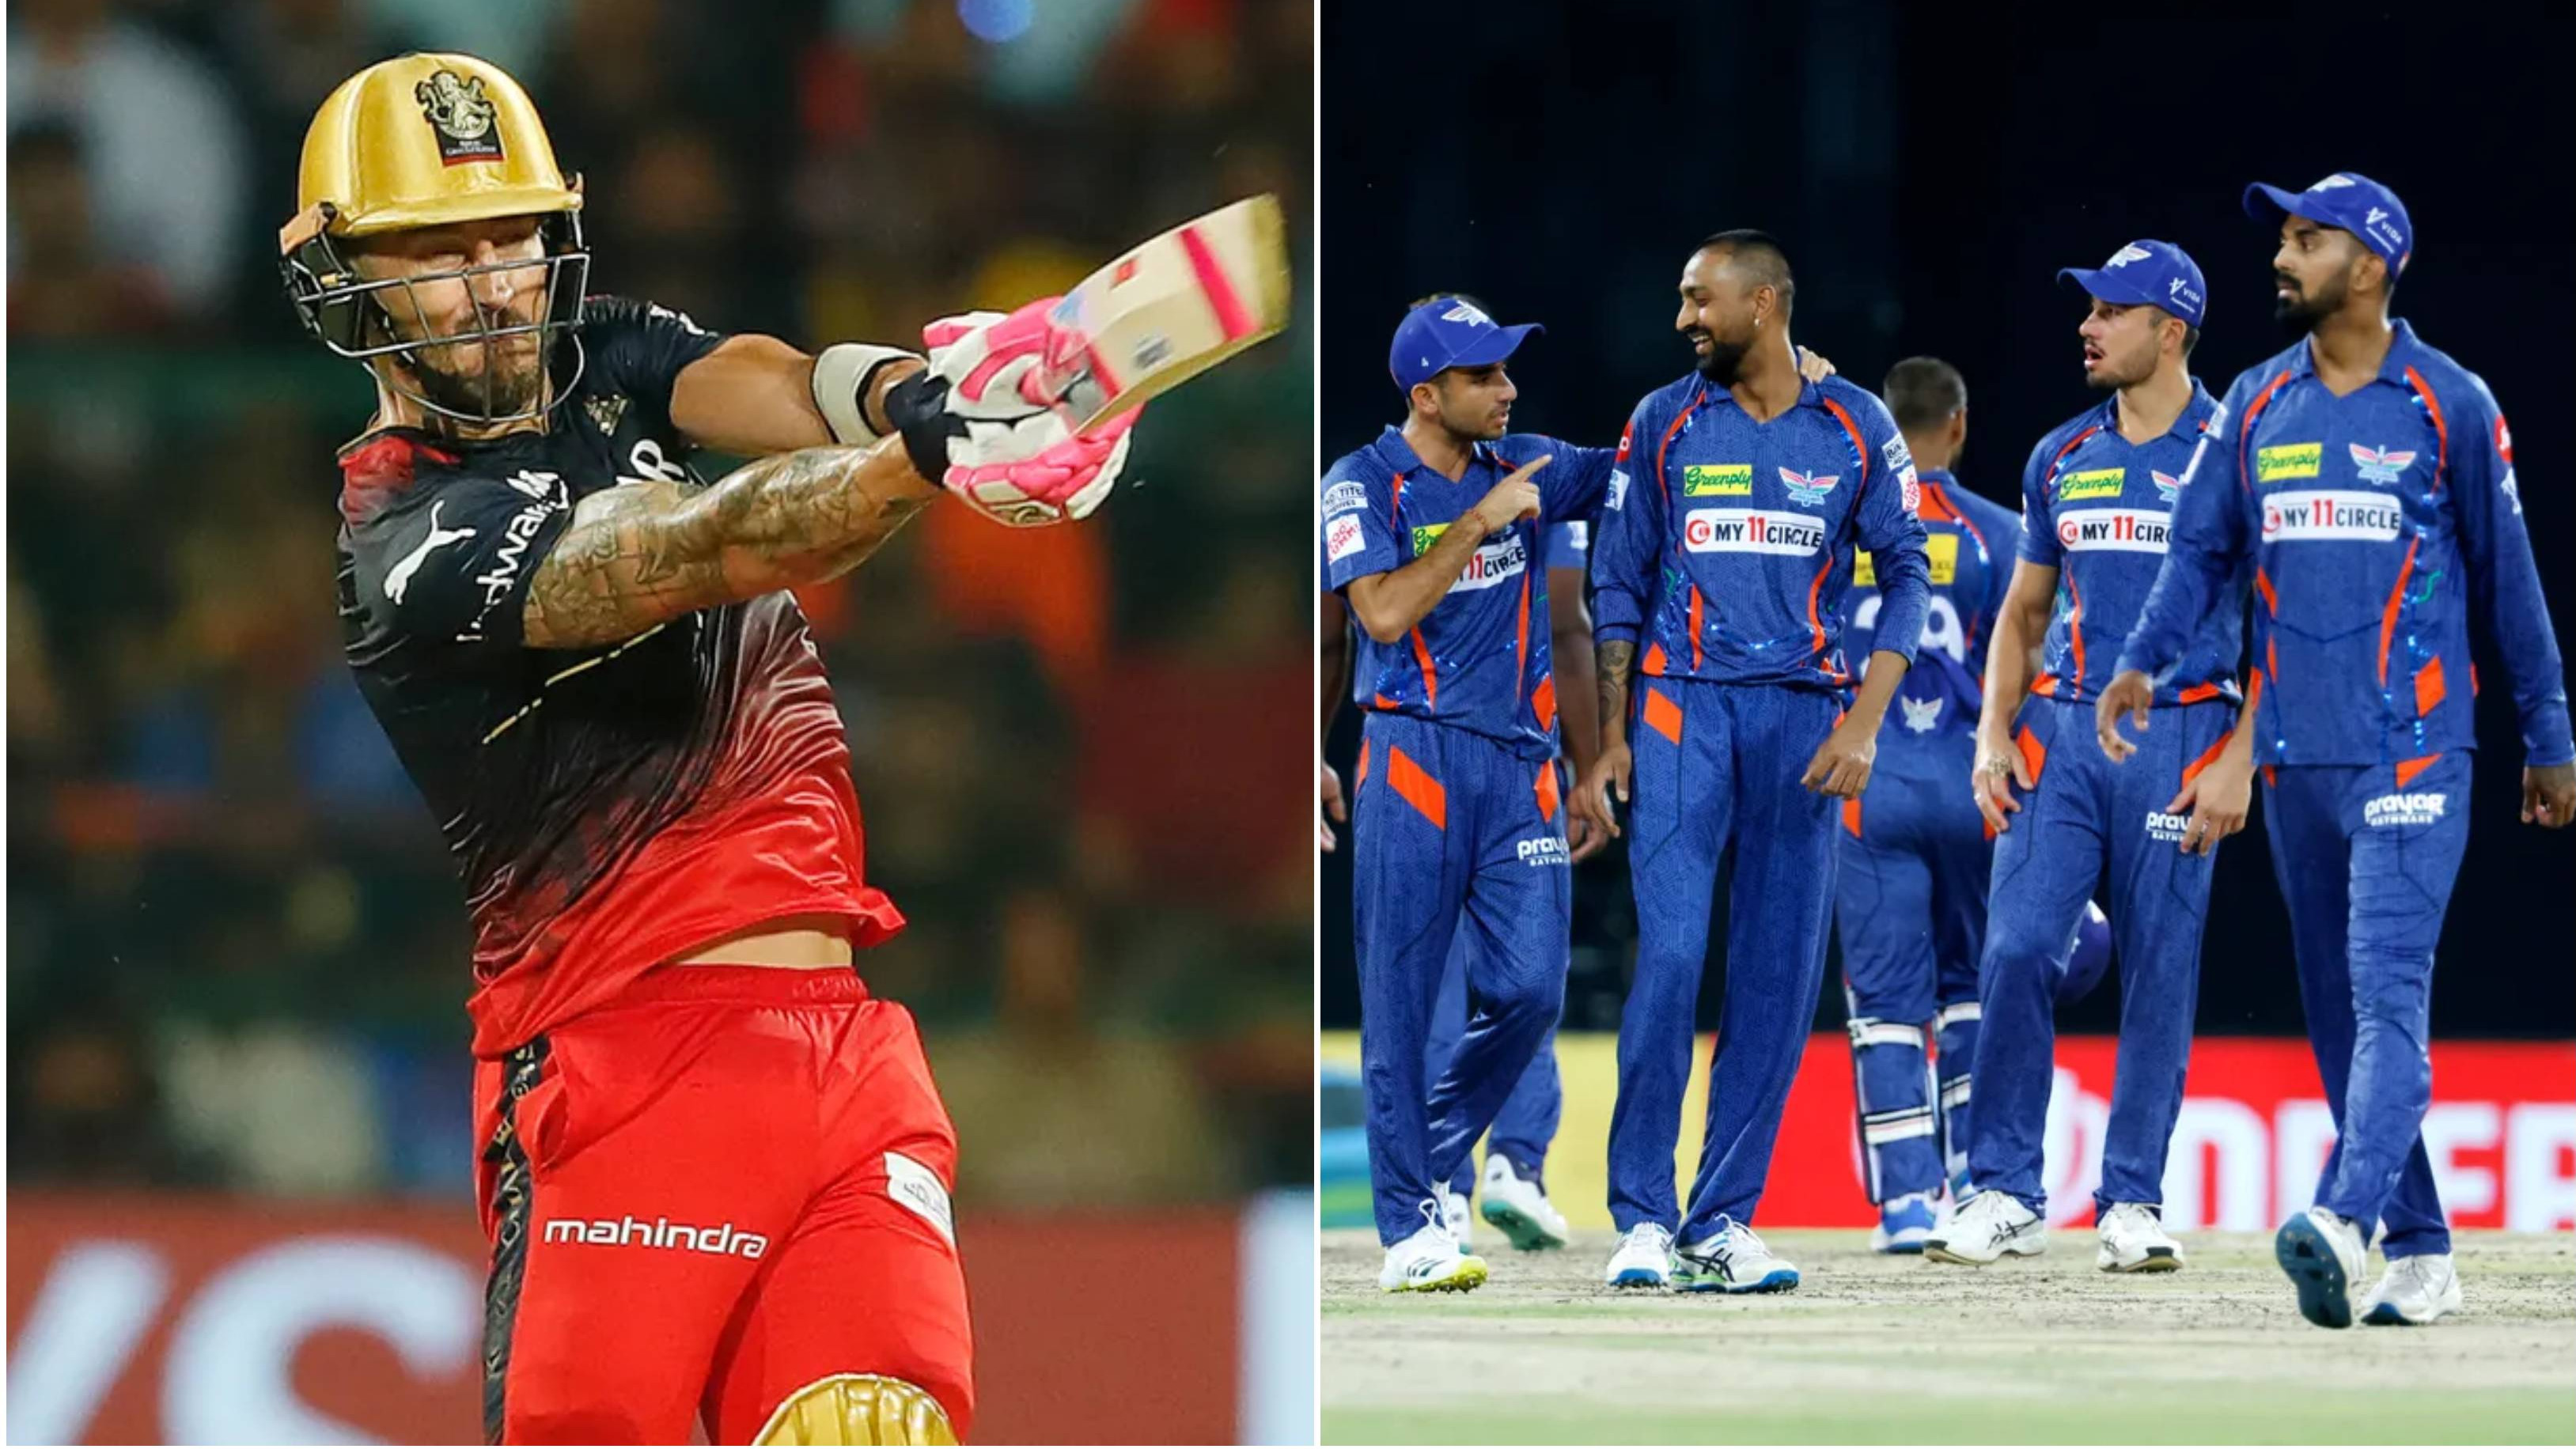 IPL 2023: “We have to be at the top of our game,” says RCB skipper Faf du Plessis ahead of LSG clash